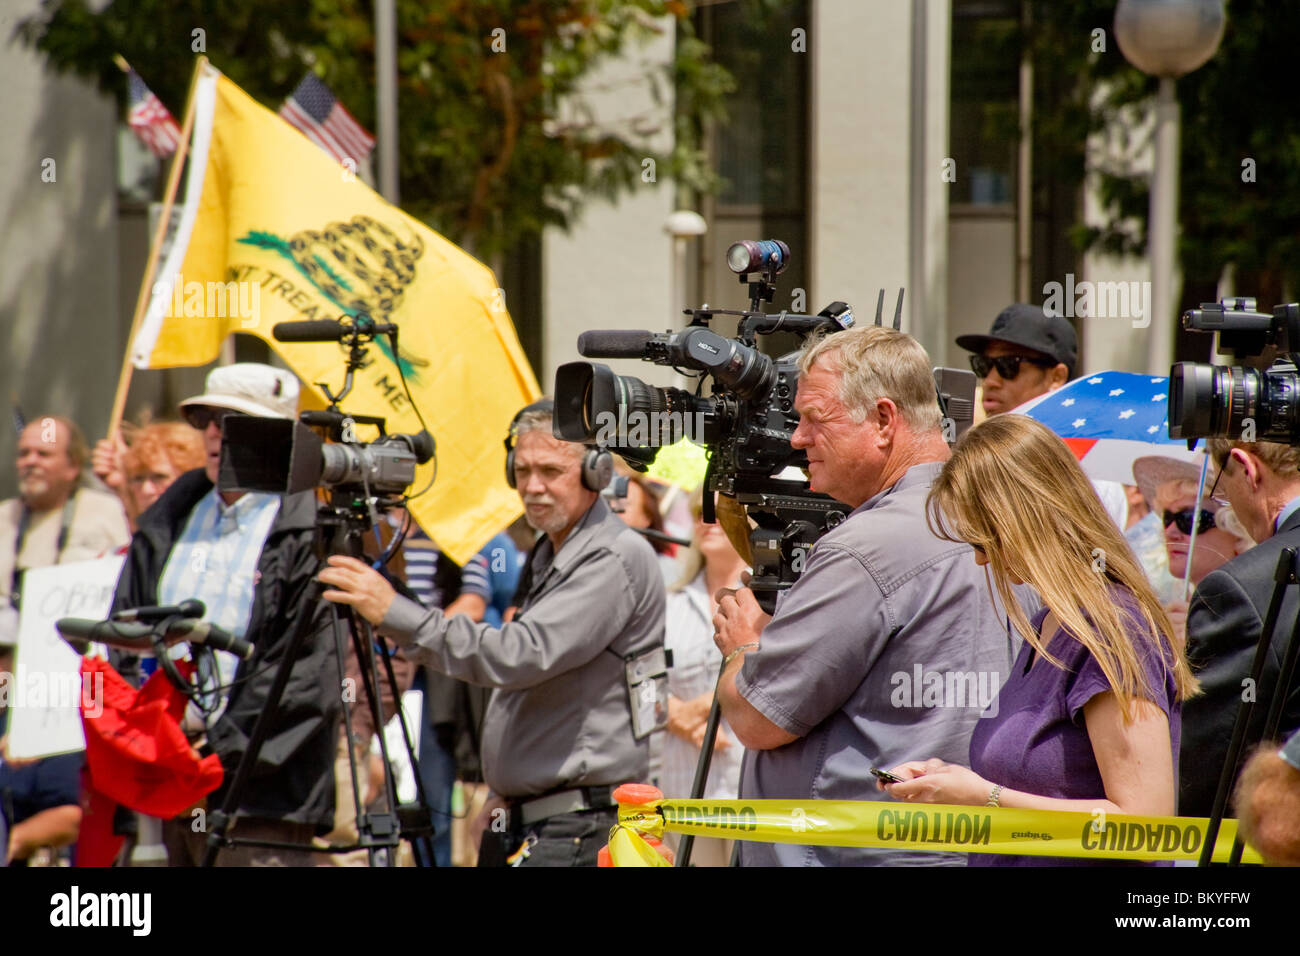 Television news camera crews cover a 'Tea Party' rally on April 15 (Tax Day) in Santa Ana, California. Note flag in background. Stock Photo